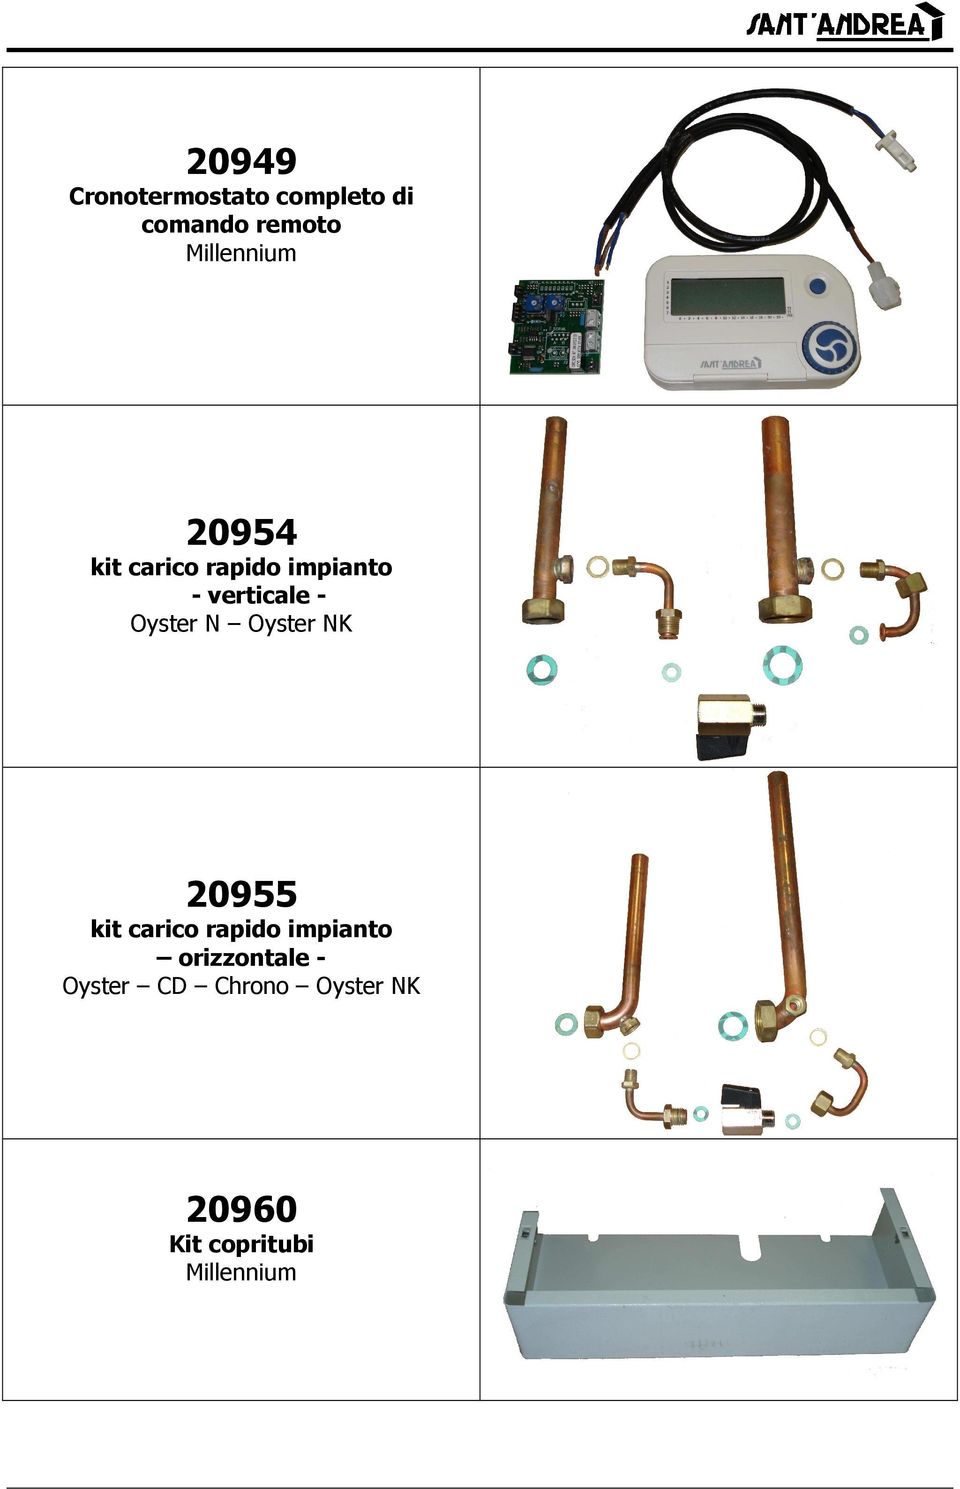 Oyster N Oyster NK 20955 kit carico rapido impianto